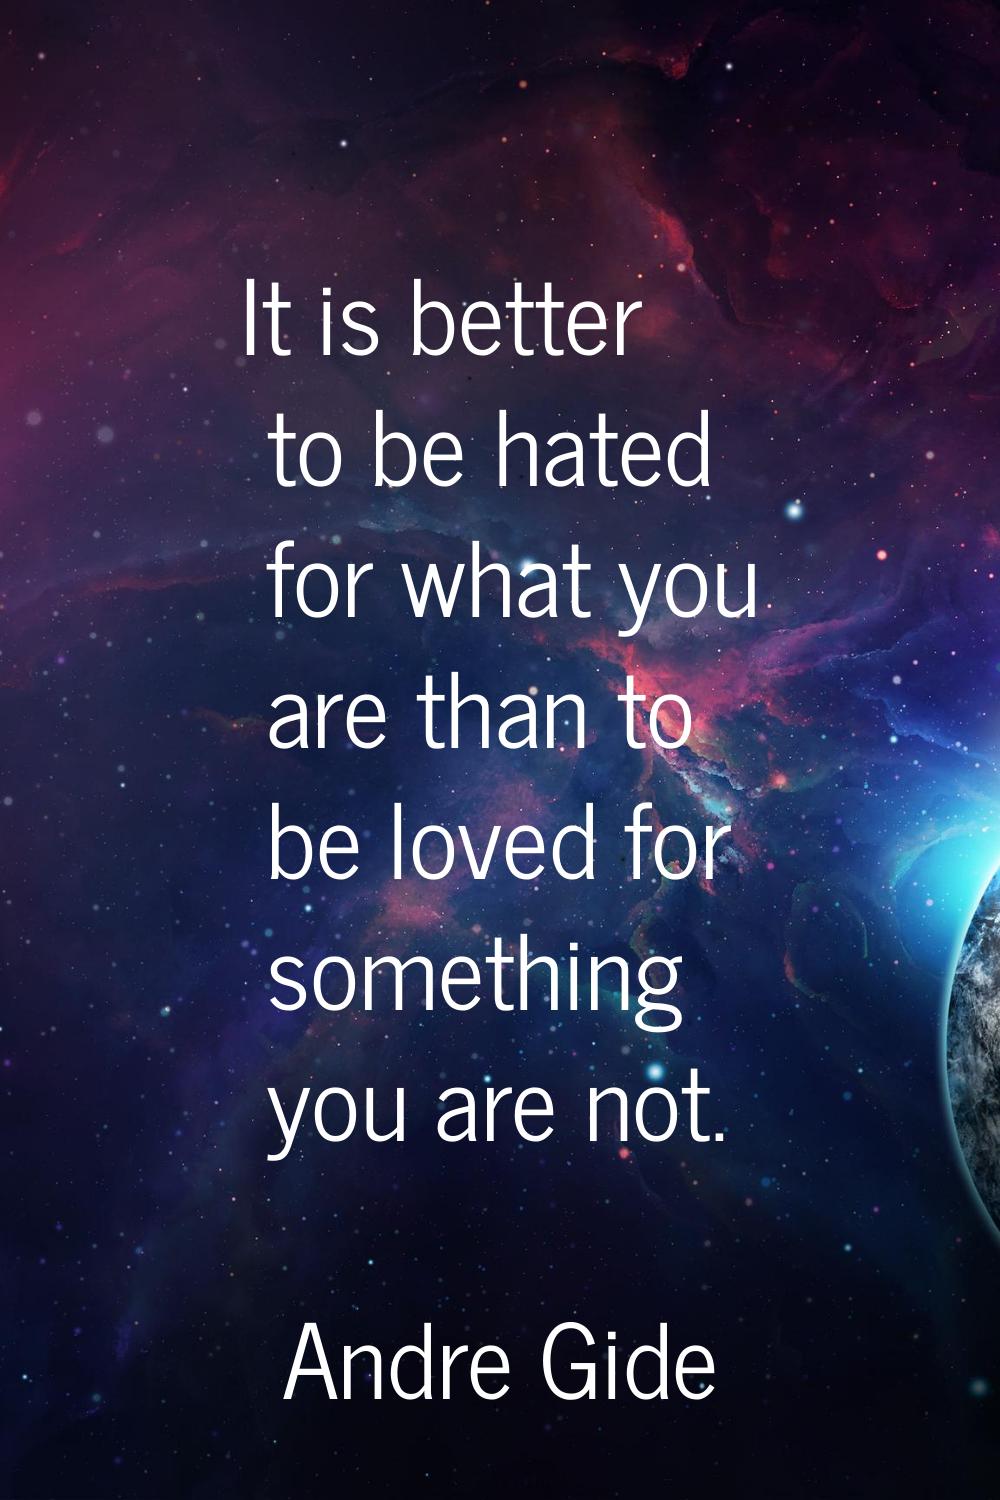 It is better to be hated for what you are than to be loved for something you are not.